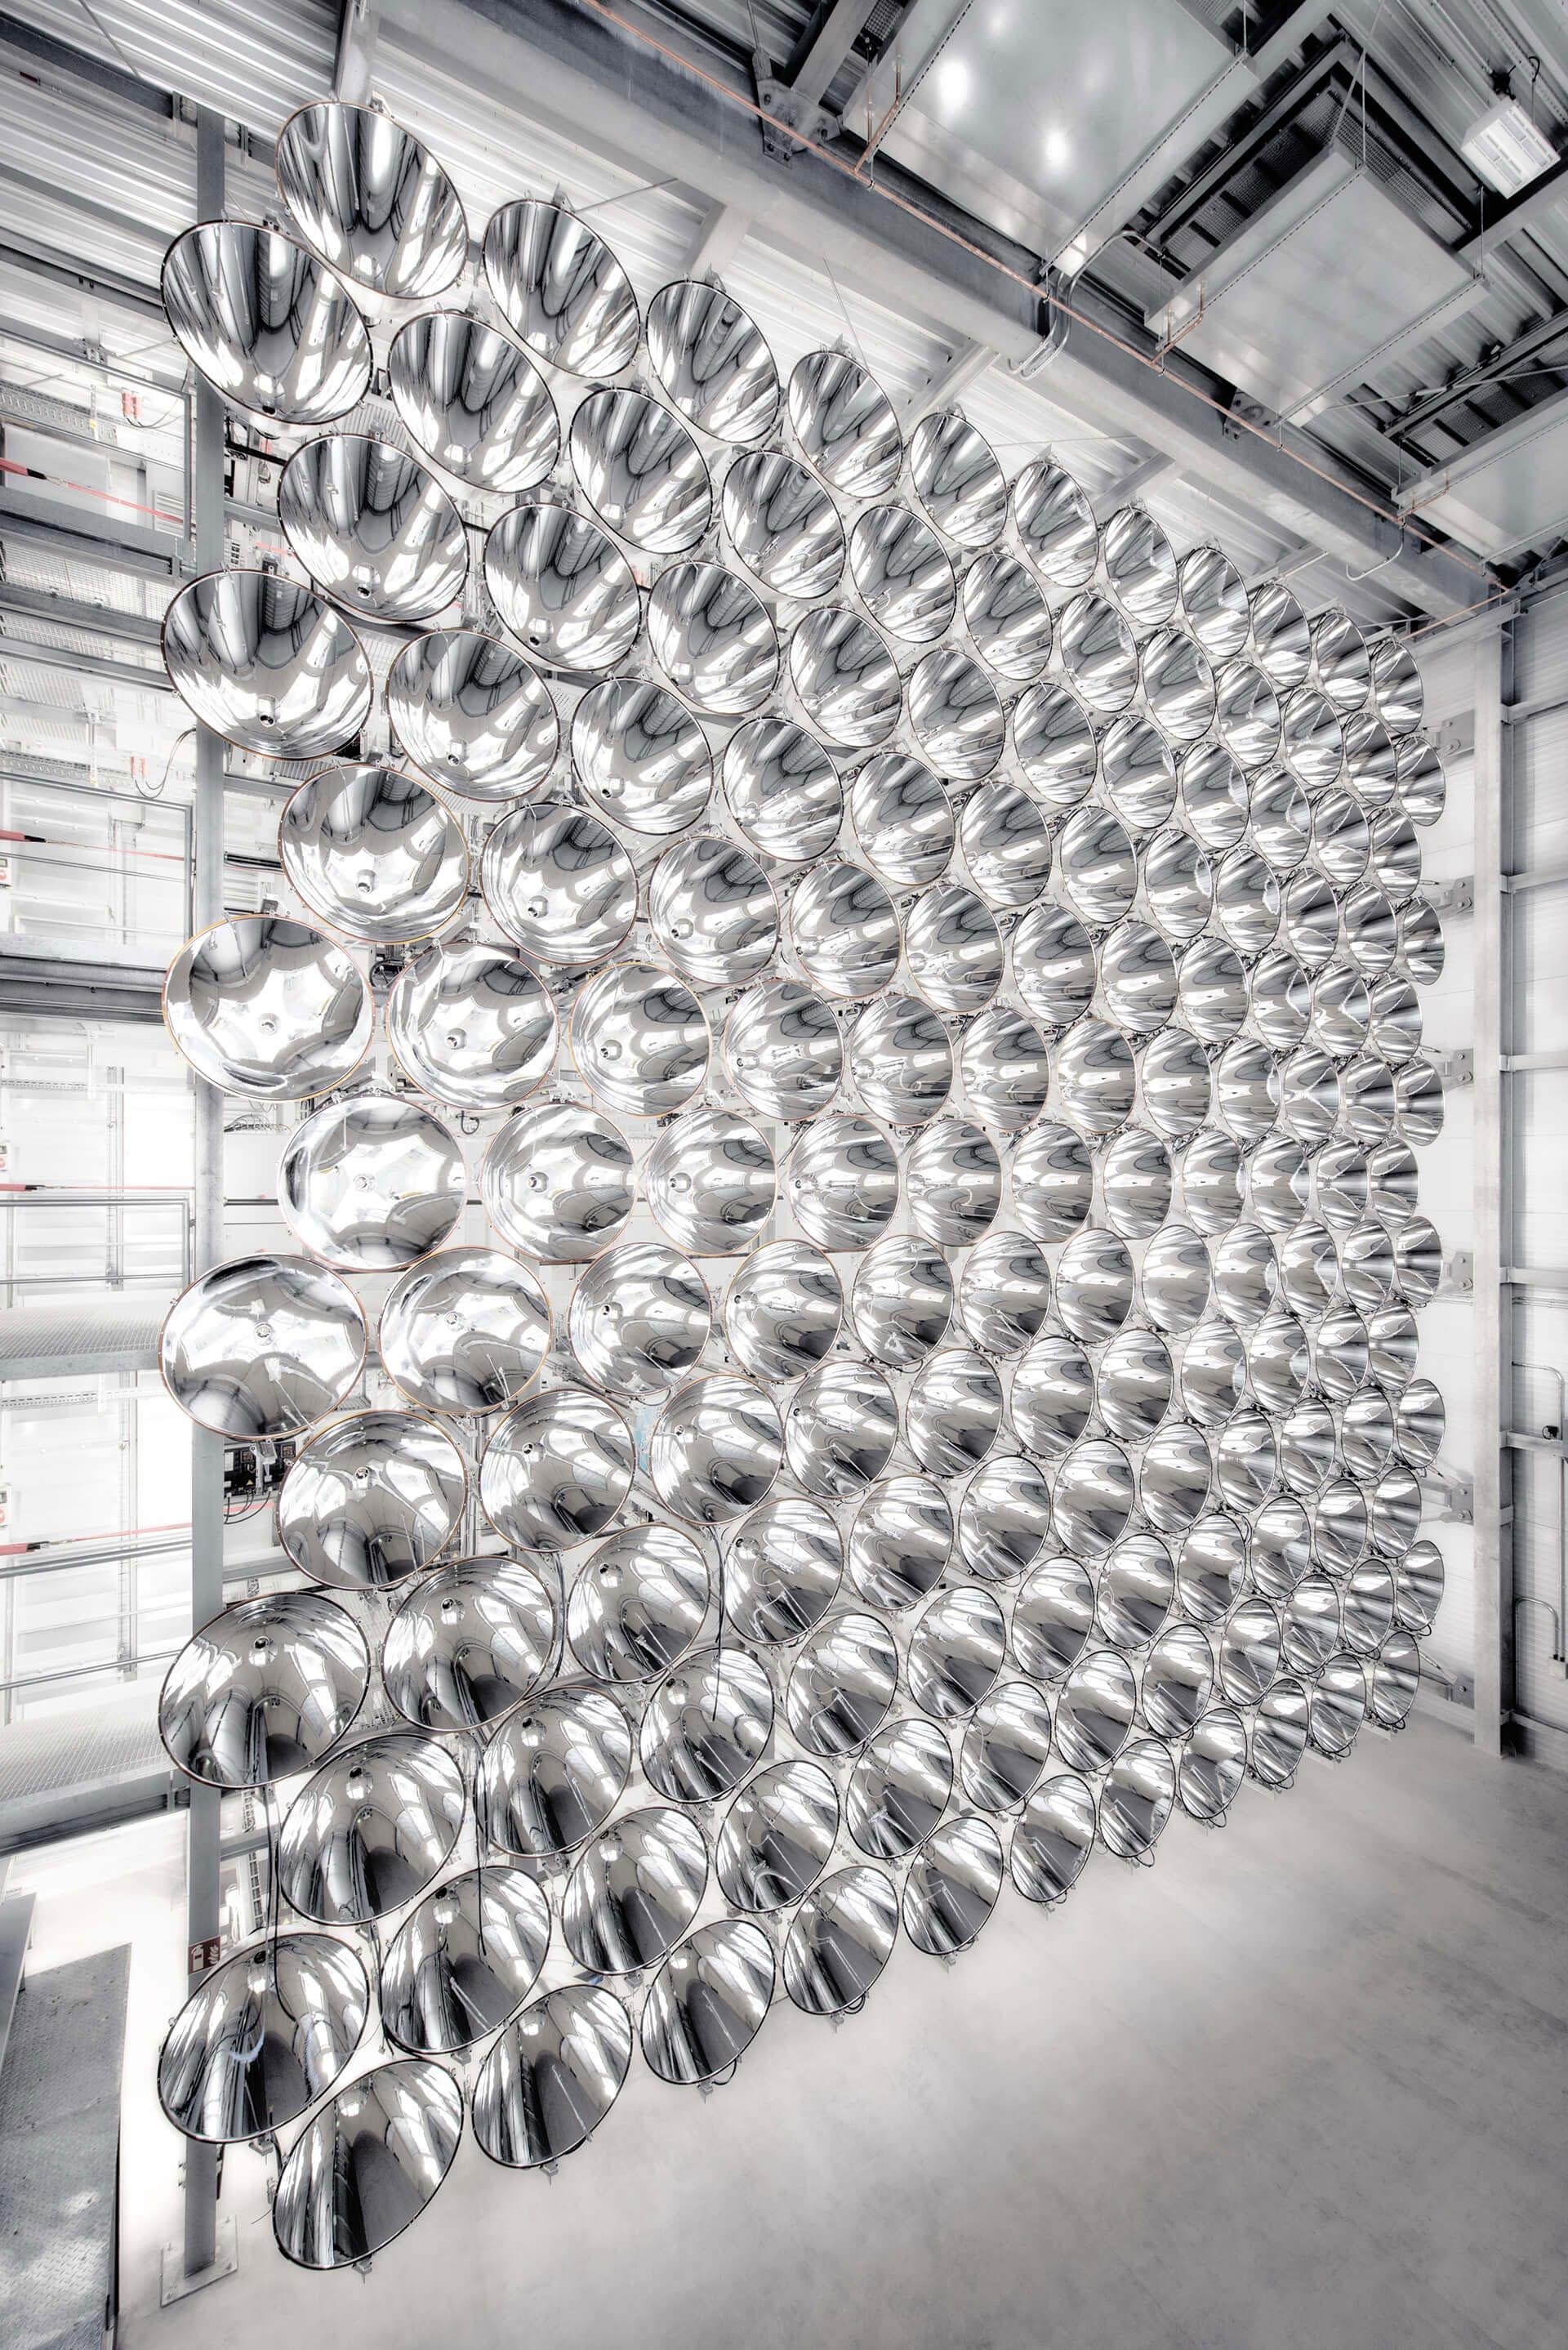 Synlight - The largest artificial Sun in the world